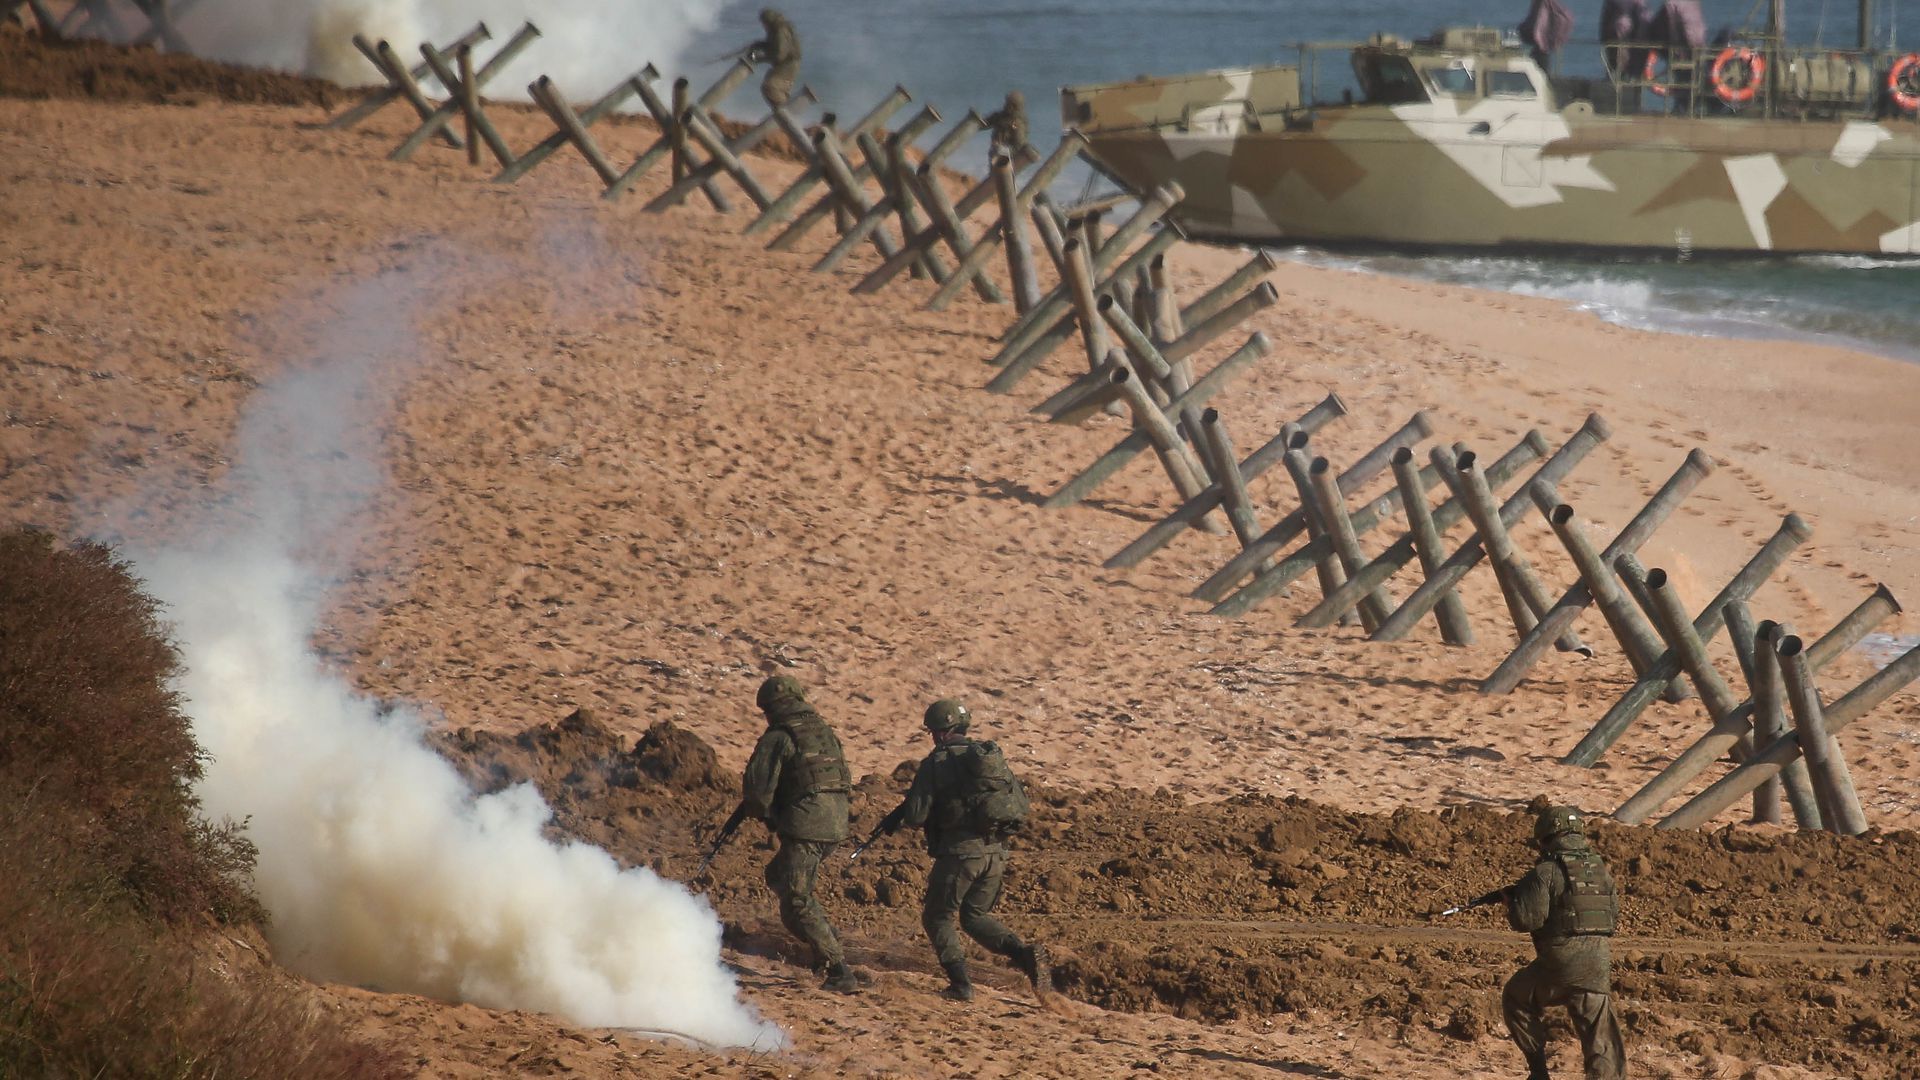 Russian troops take part in an amphibious landing exercise in Crimea last month.